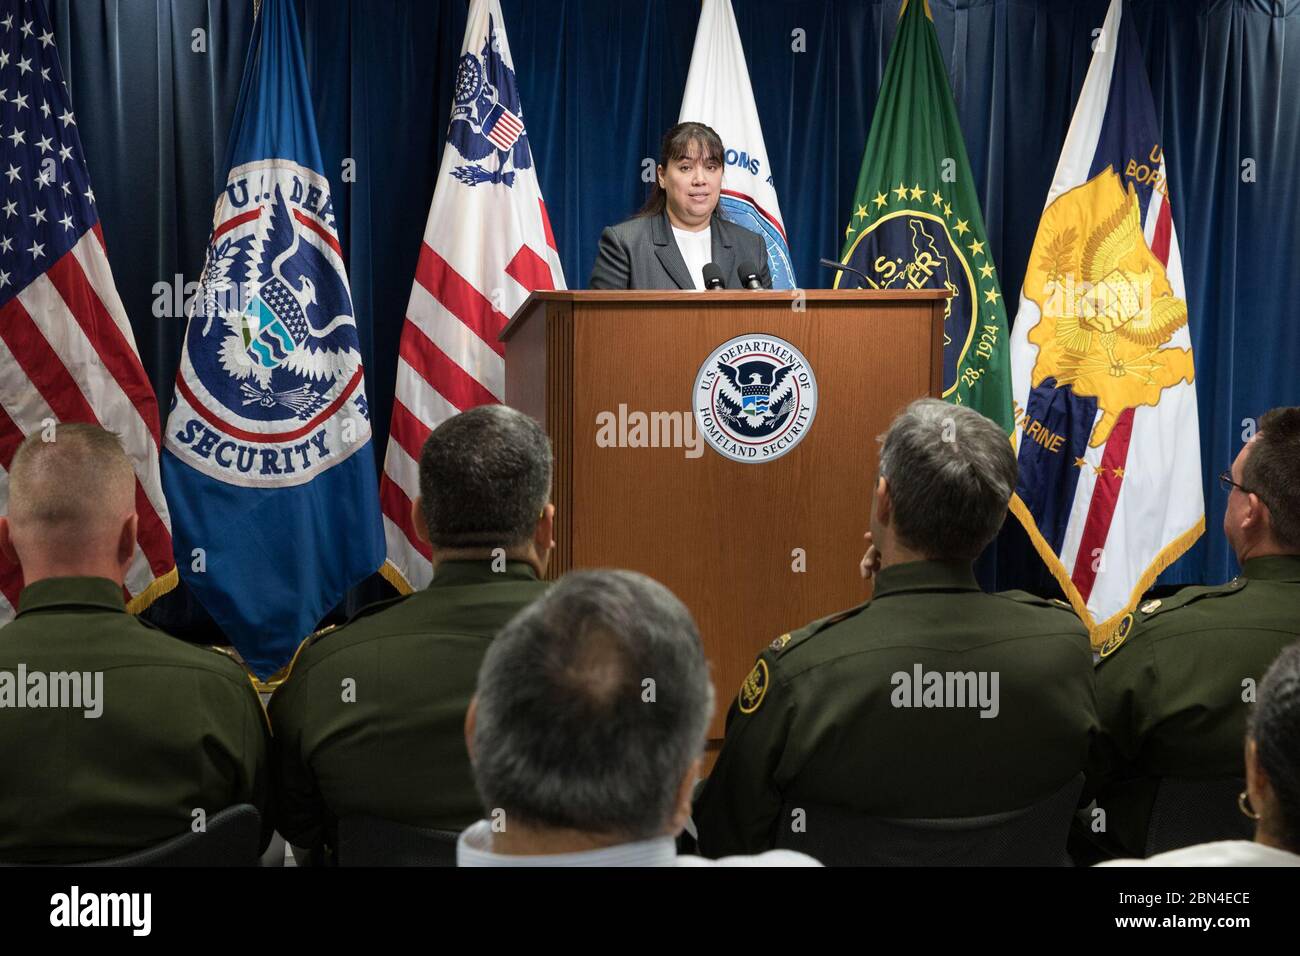 Executive Director, Privacy and Diversity Office, Rebekah Salazar delivers opening address at U.S. Customs and Border Protection’s National Hispanic Heritage Month themed “Hispanics: One Endless Voice to Enhance Our Traditions” at U.S. Customs and Border Protection Headquarters in Washington, DC on October 4, 2018. Stock Photo